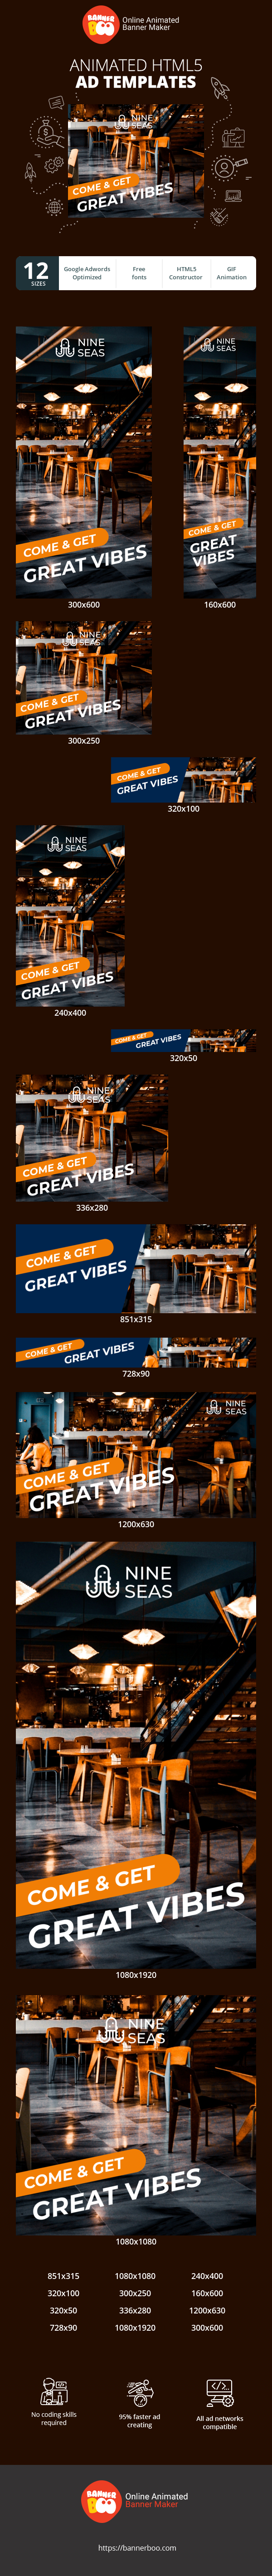 Banner ad template — Come & Get — Great Vibes Good Food